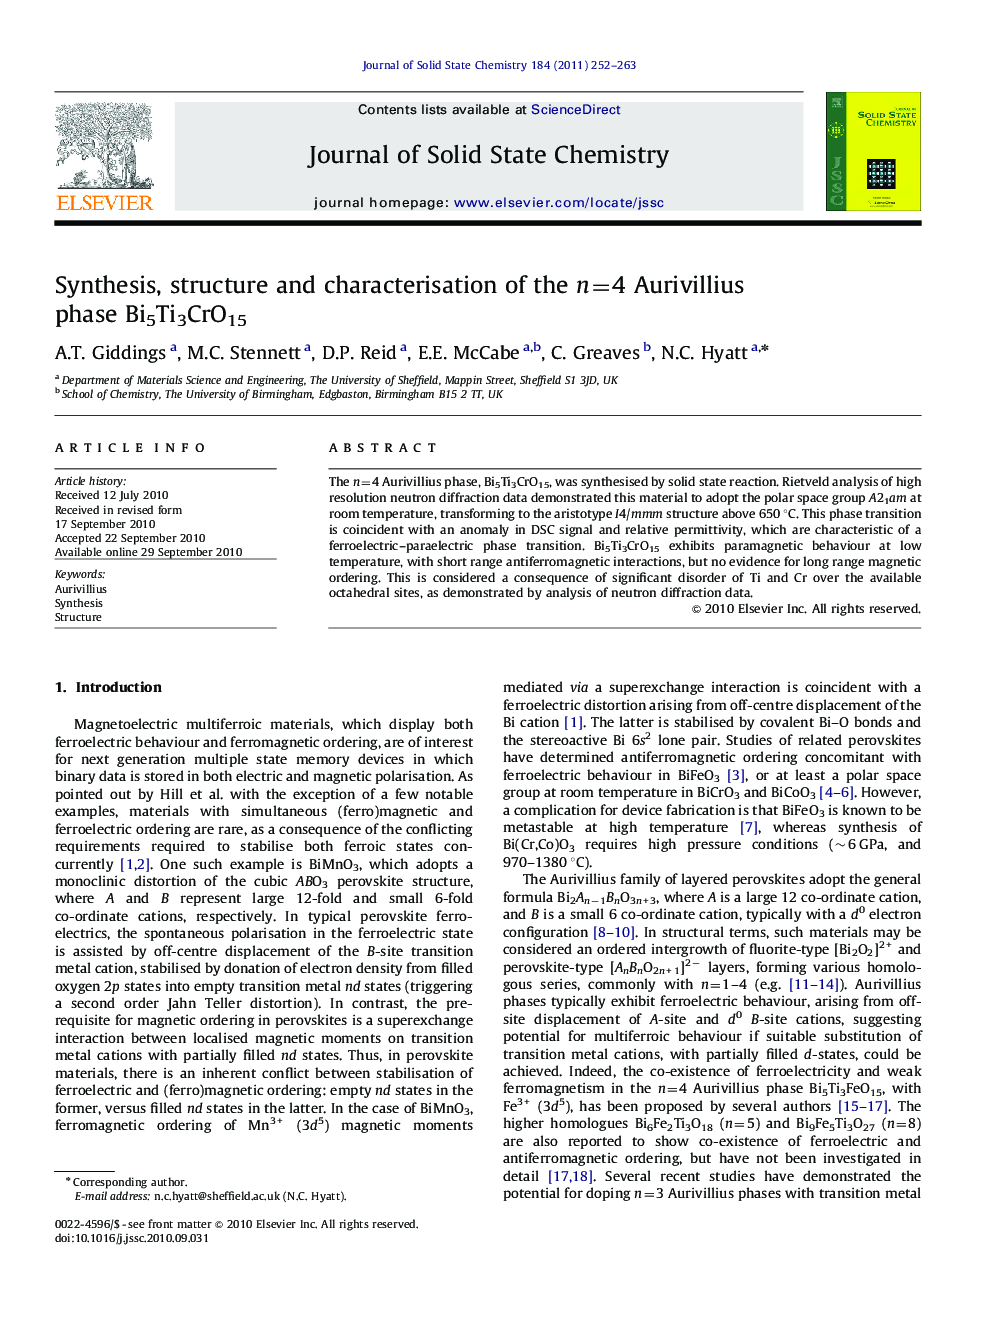 Synthesis, structure and characterisation of the n=4 Aurivillius phase Bi5Ti3CrO15